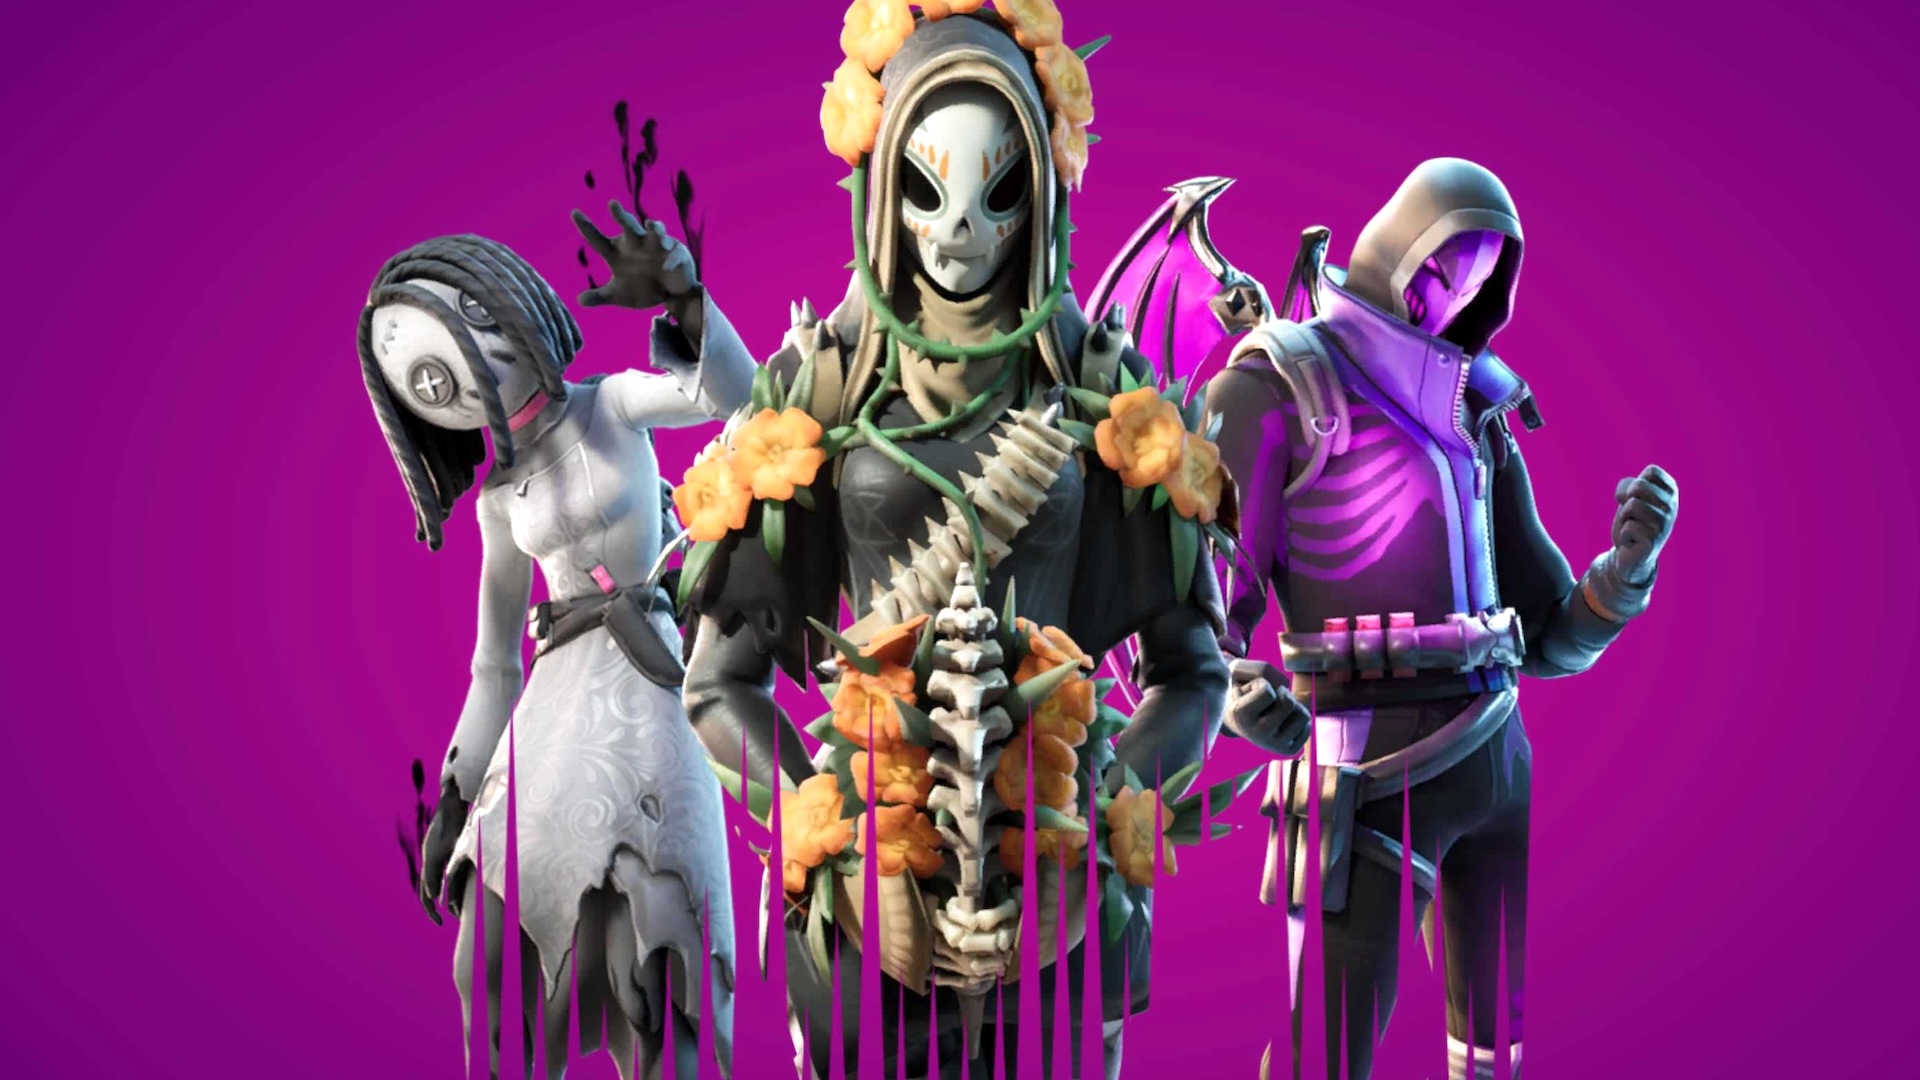 Everything new coming in Fortnite OG: outfits, weapons, items